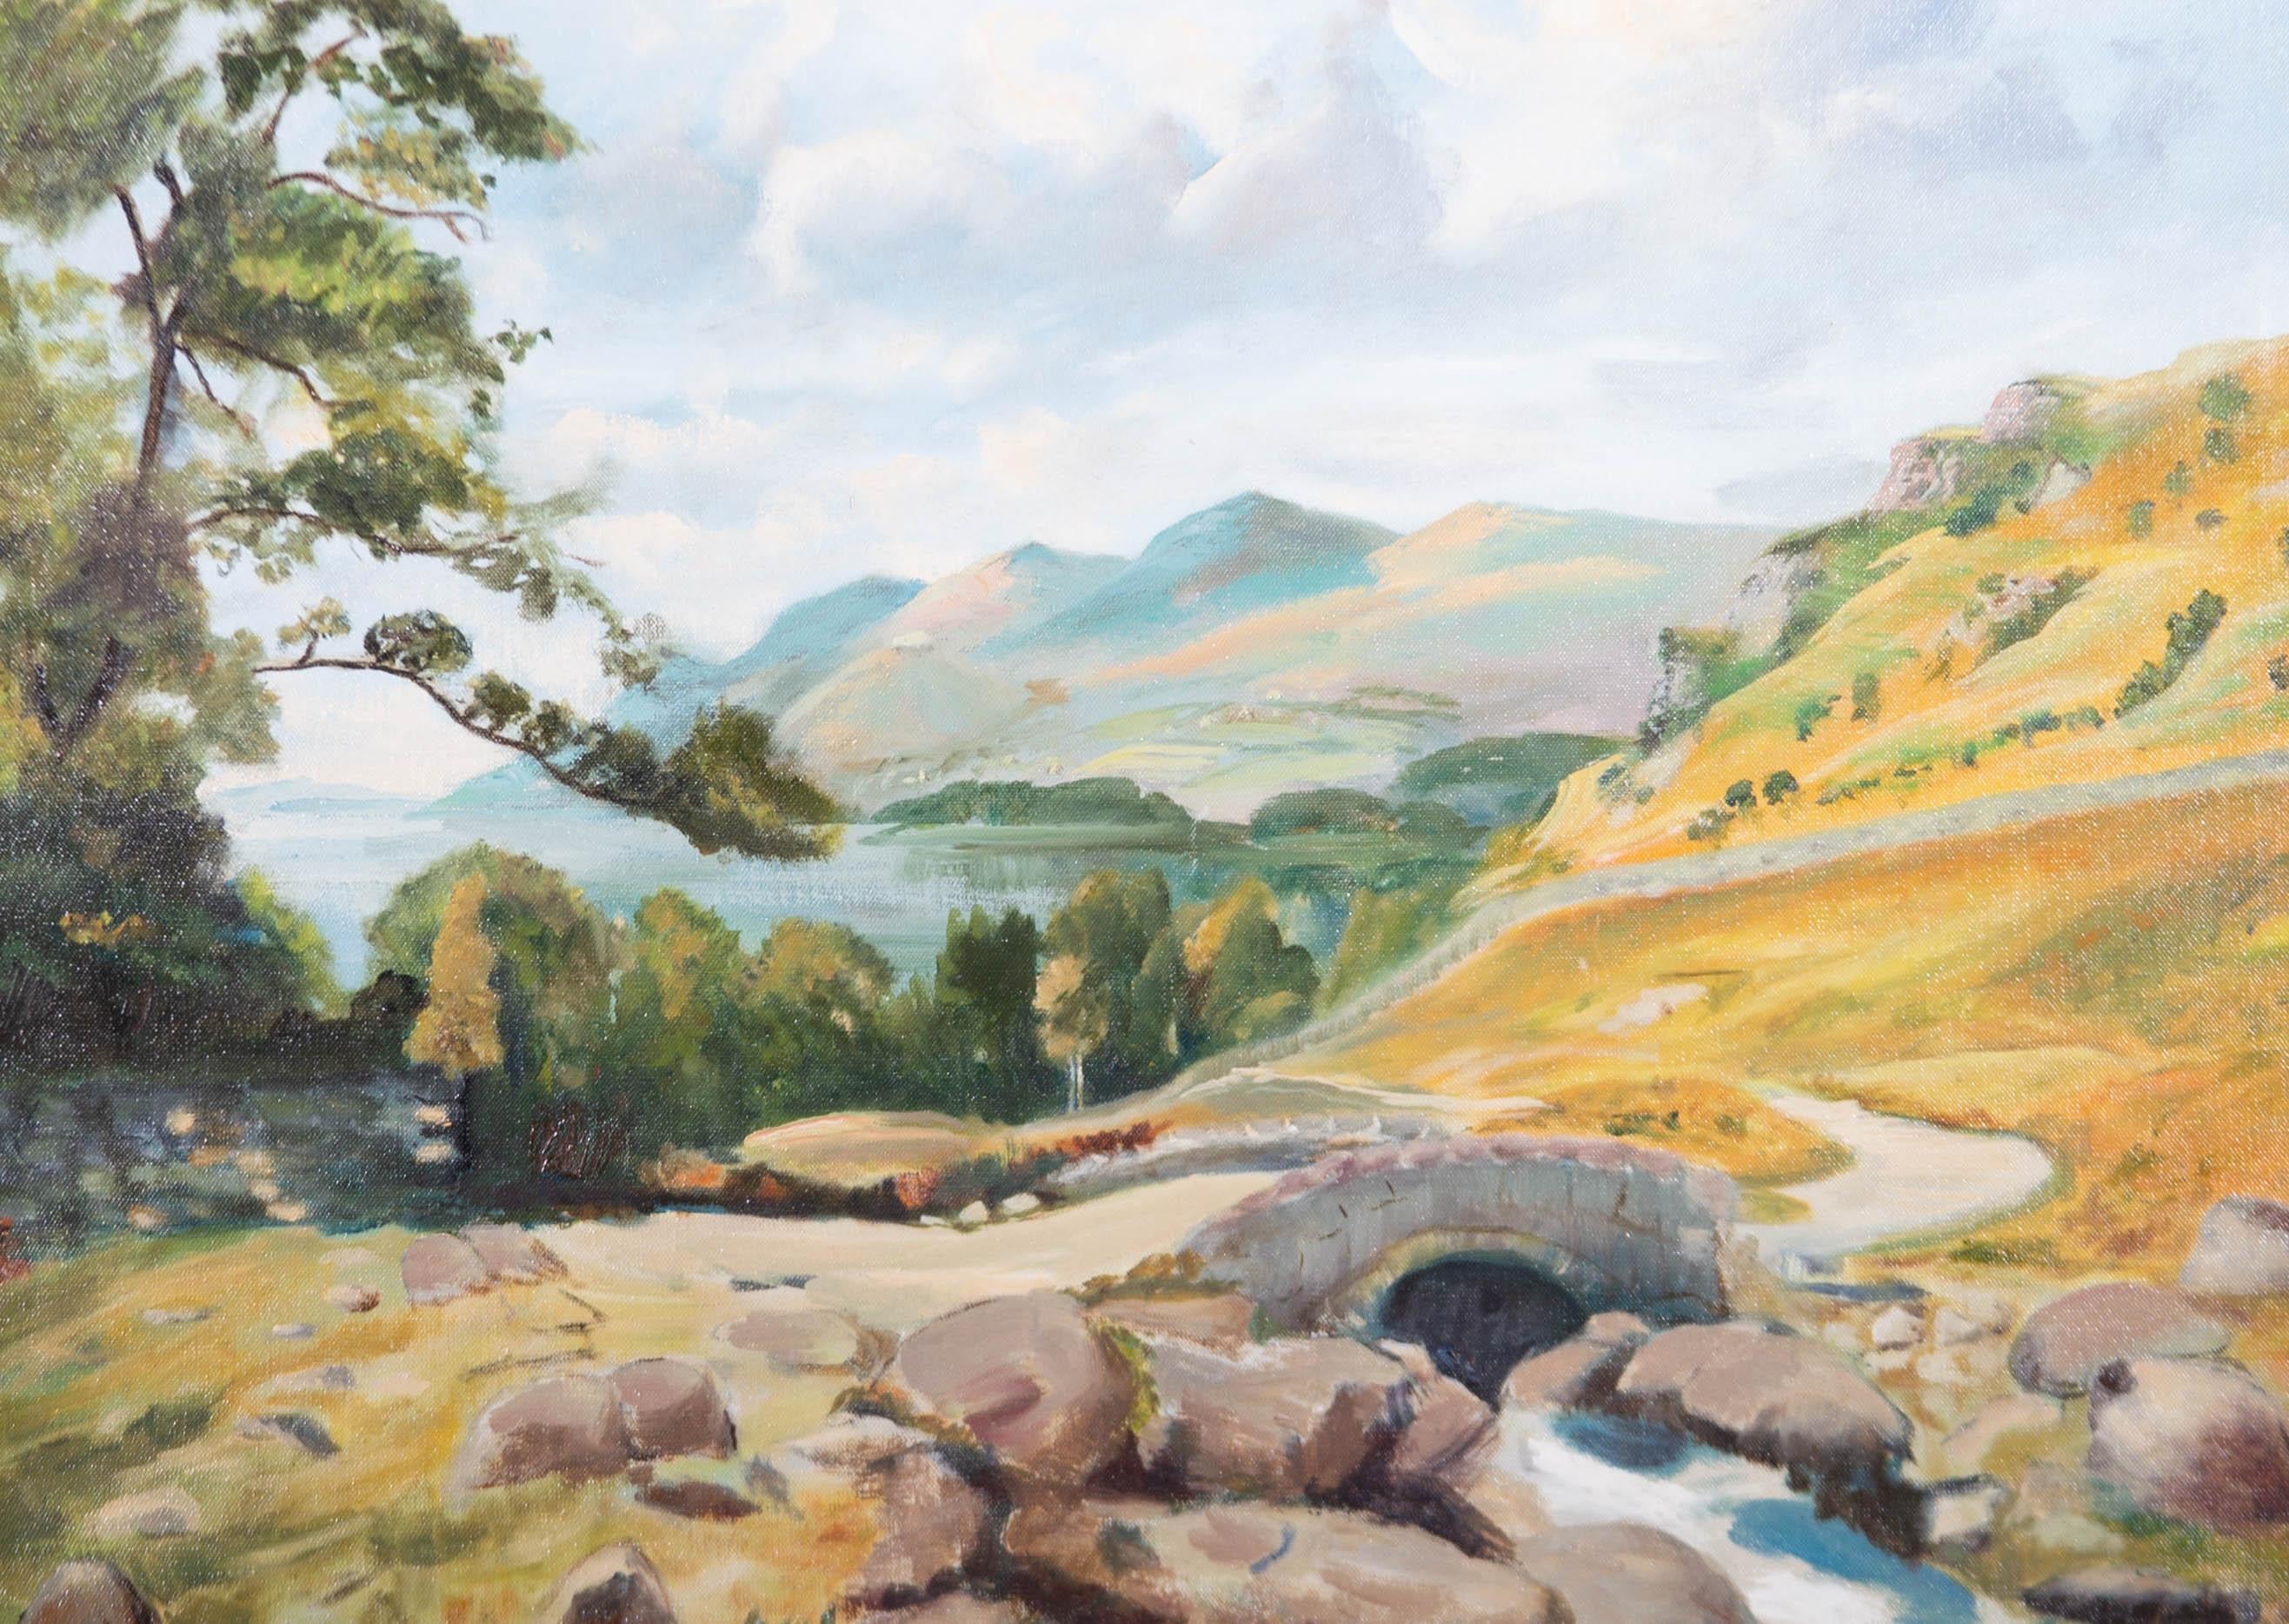 Contemporary Oil - Highland View with Arch Bridge - Brown Landscape Painting by Unknown